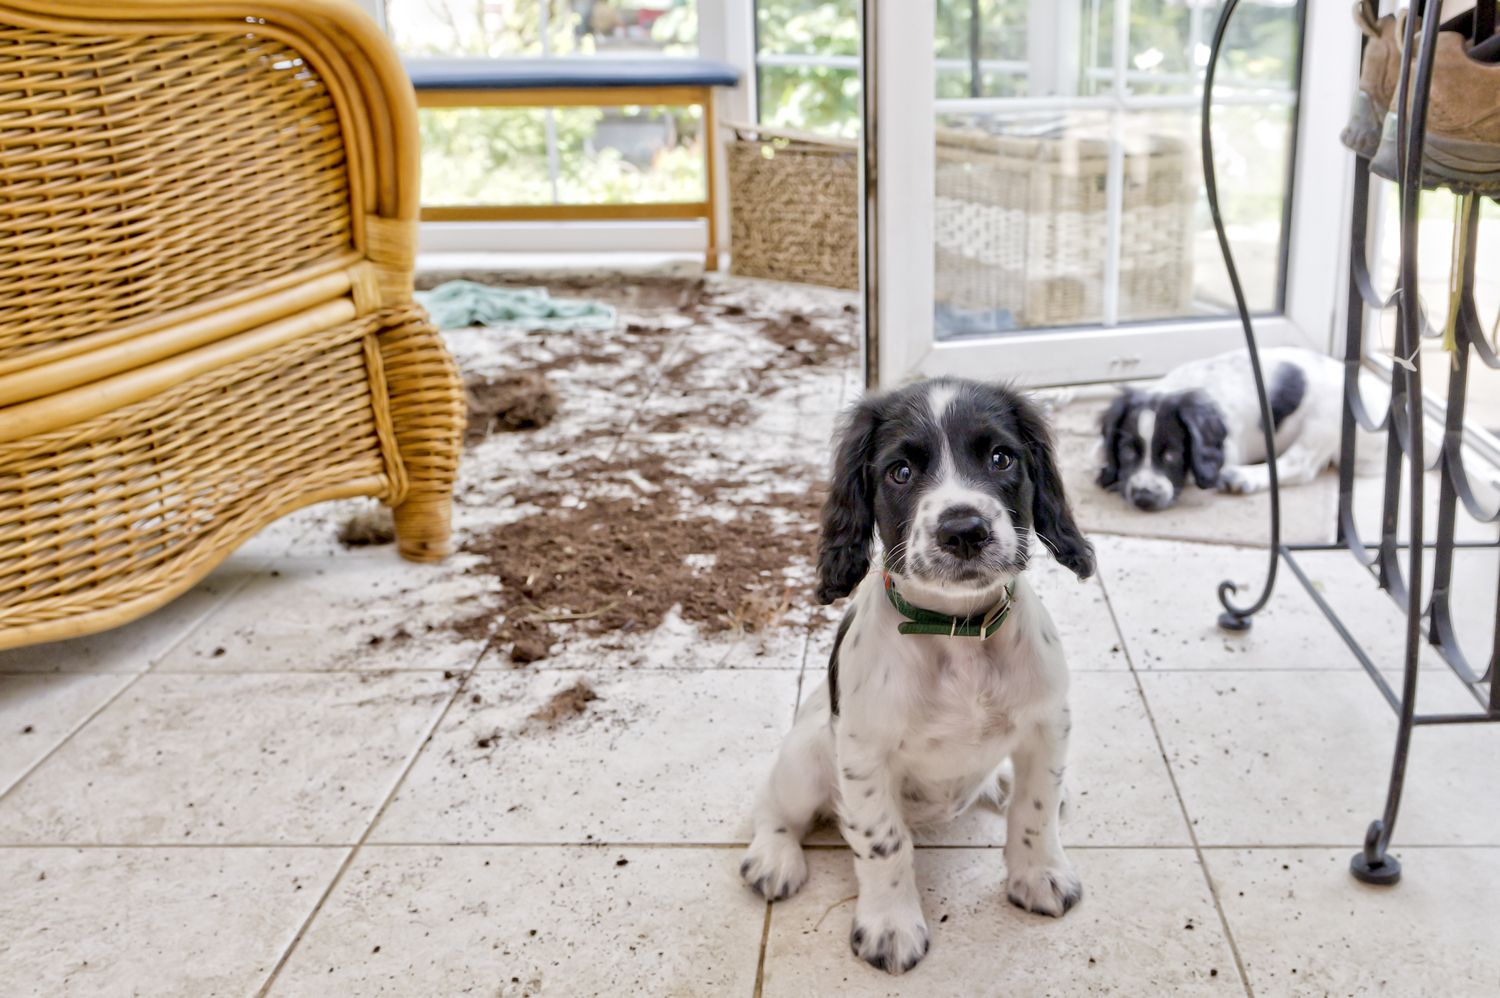 Two cute puppies while playing have knocked over a plant pot with soil over the floor.